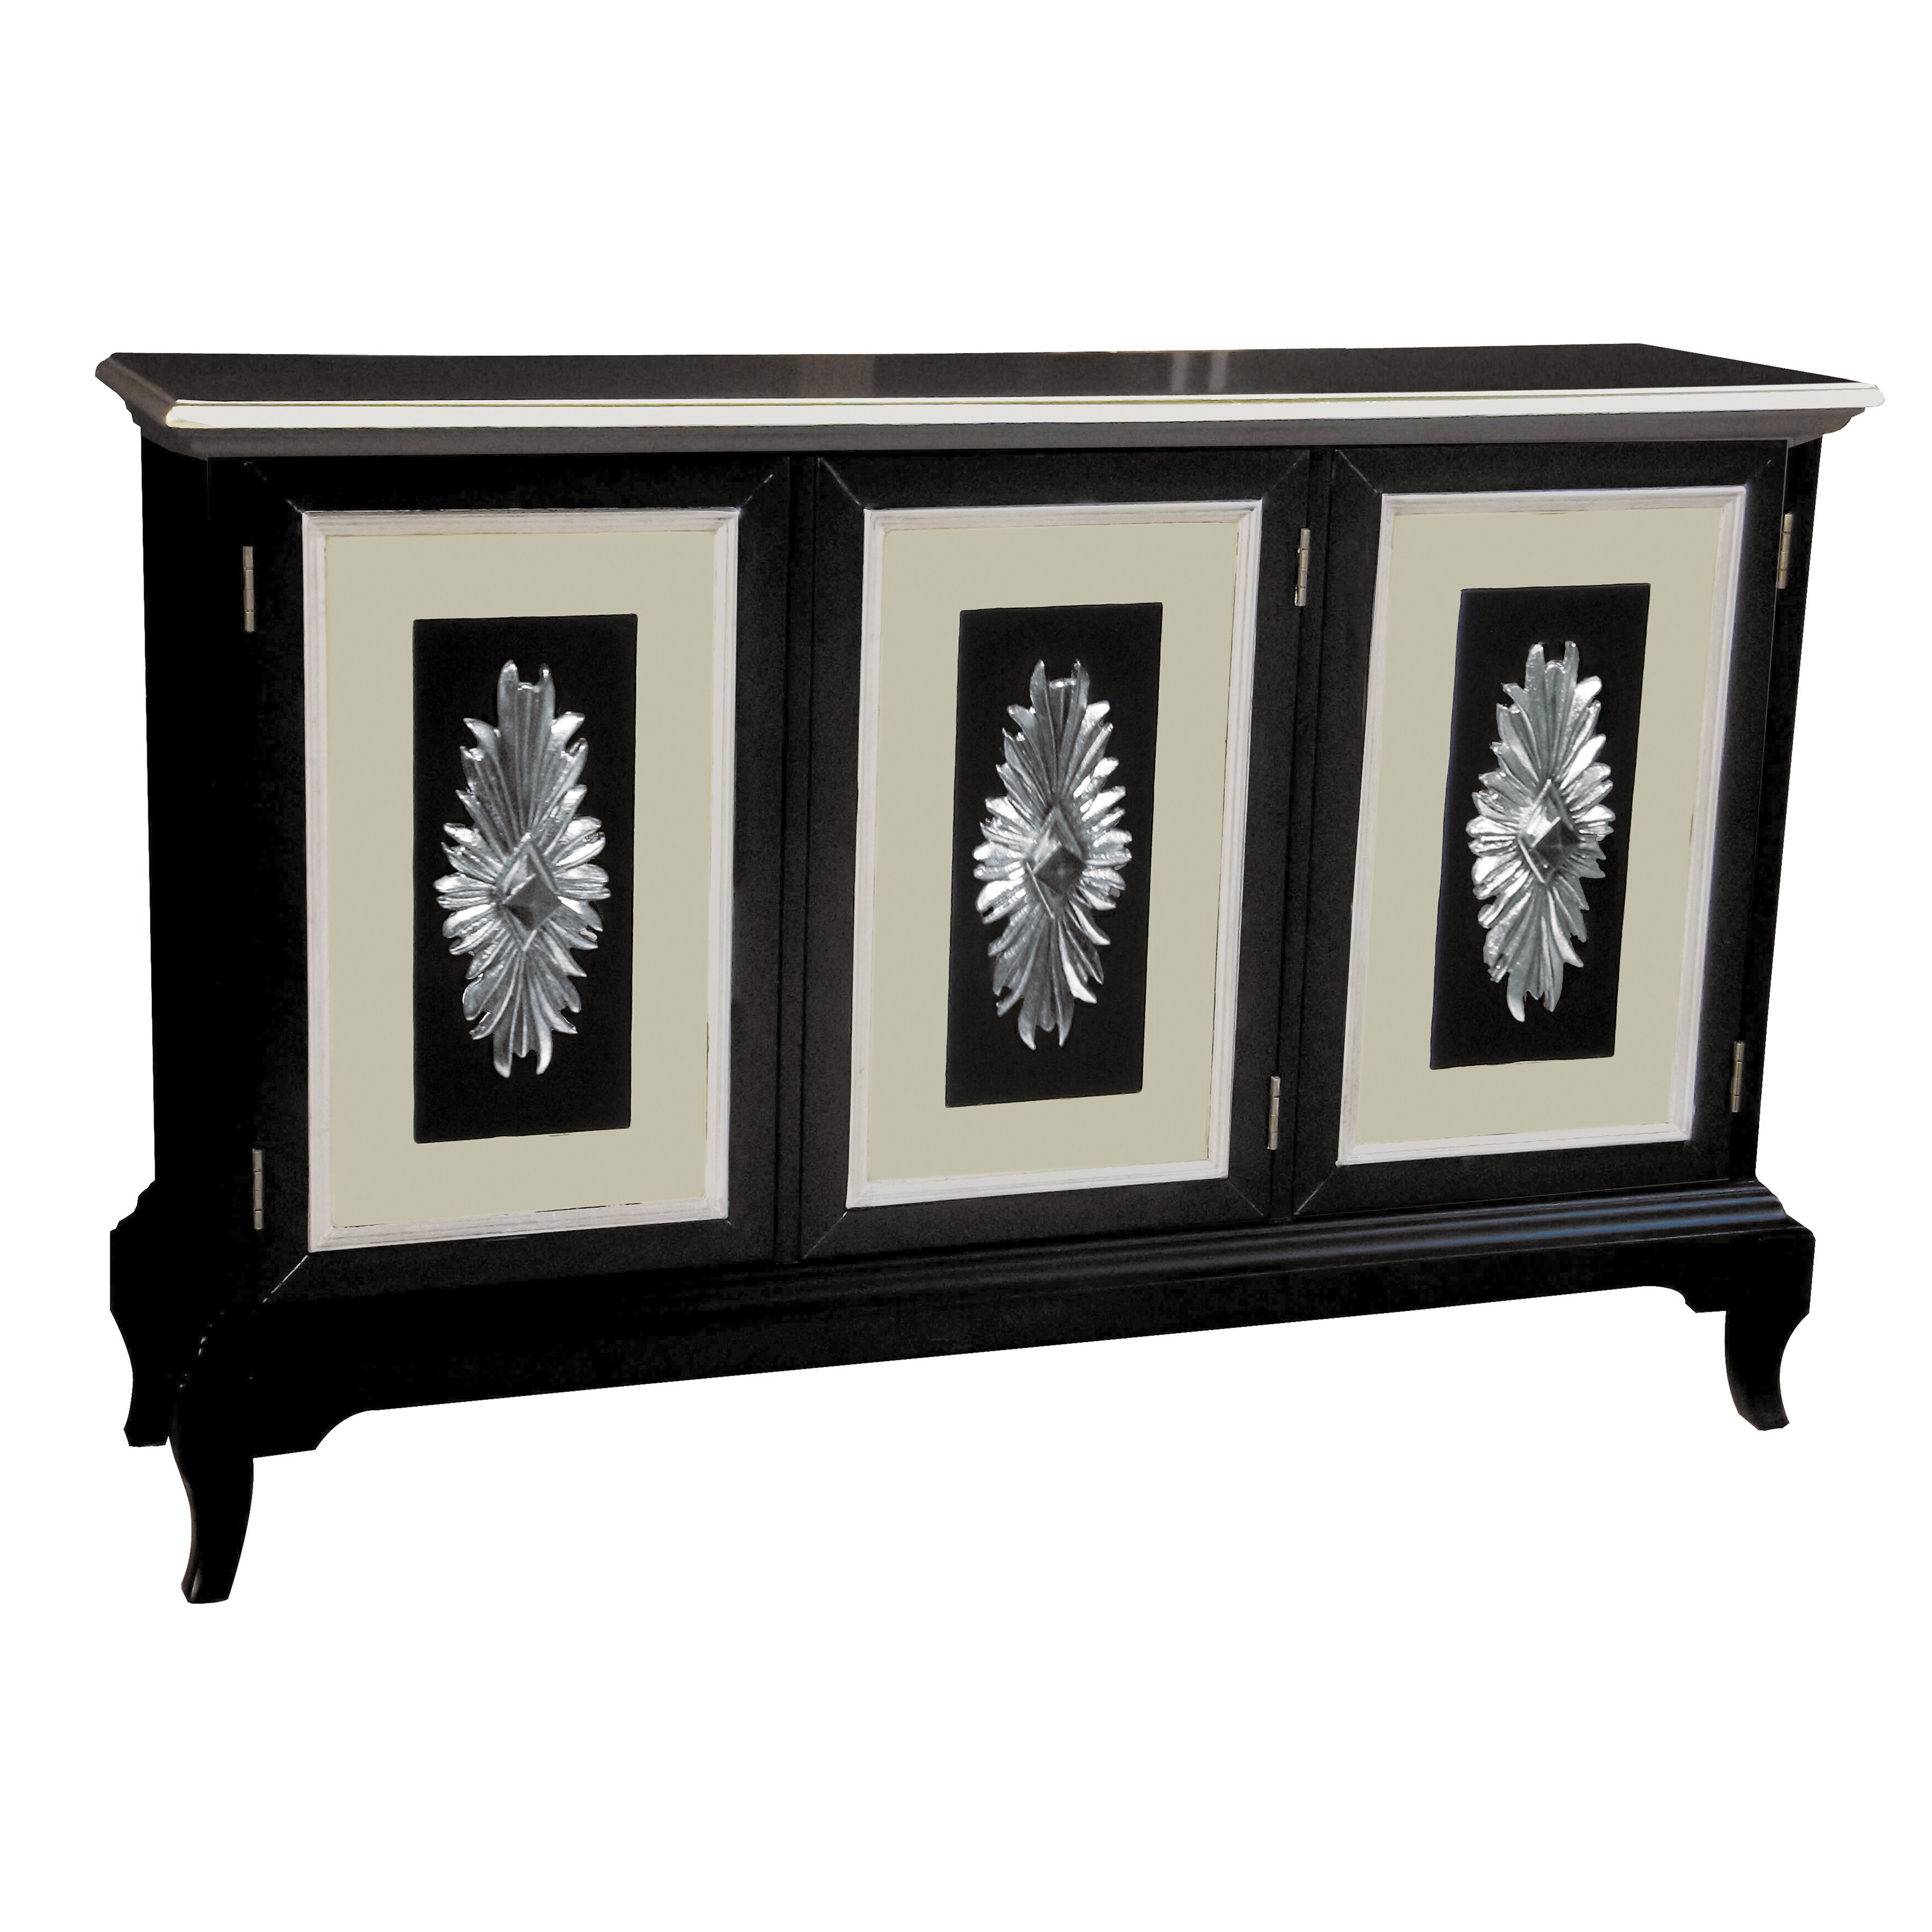 Glossy Black Finish Credenza with White and Tan Accents